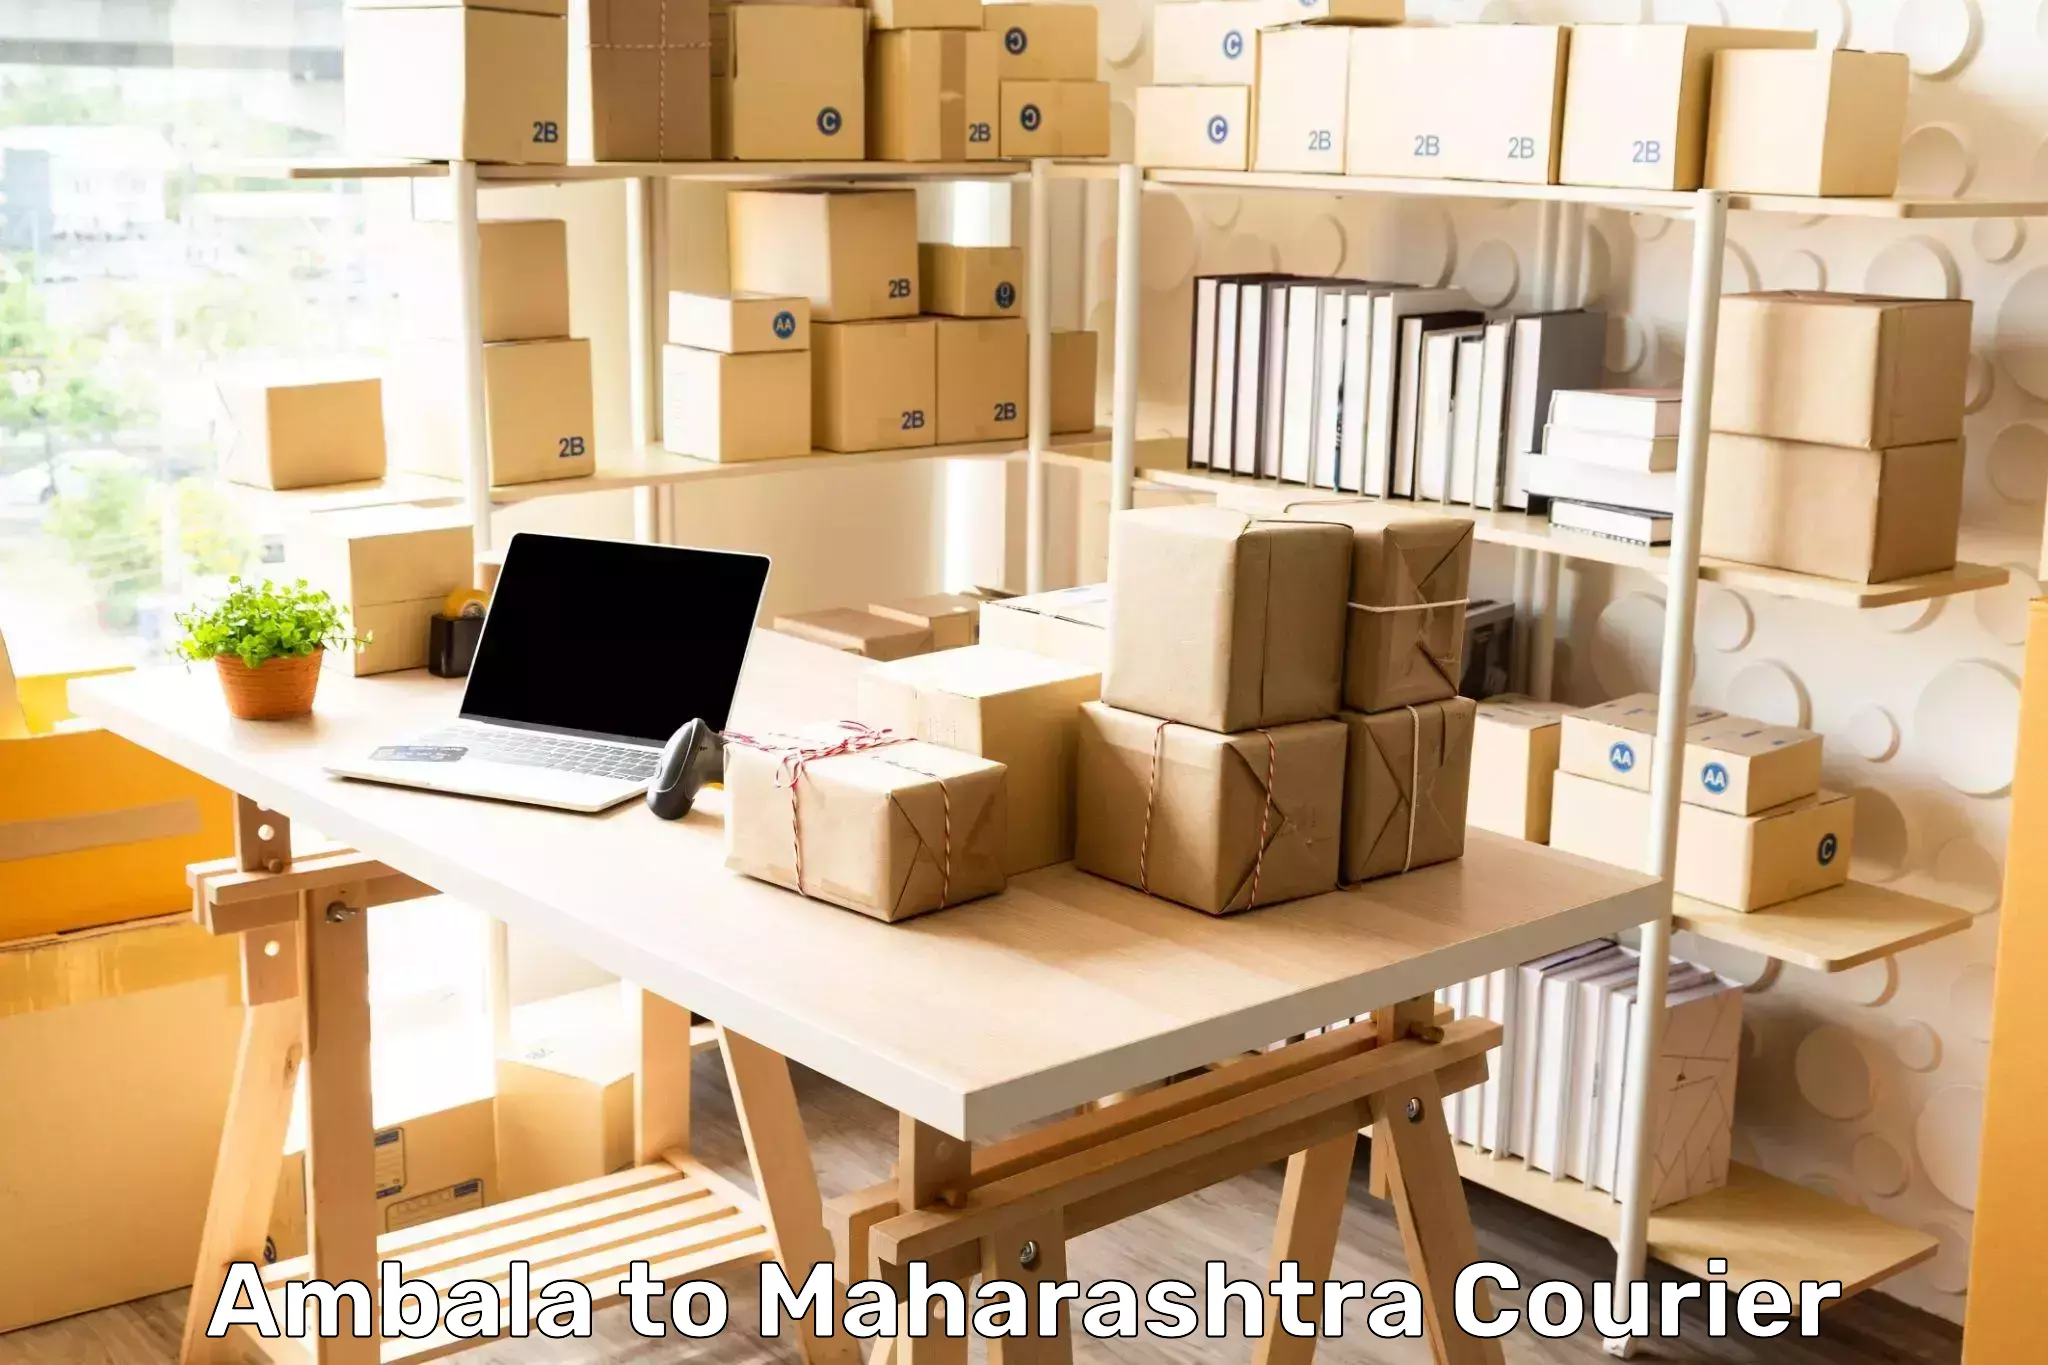 Multi-service courier options in Ambala to Mahad